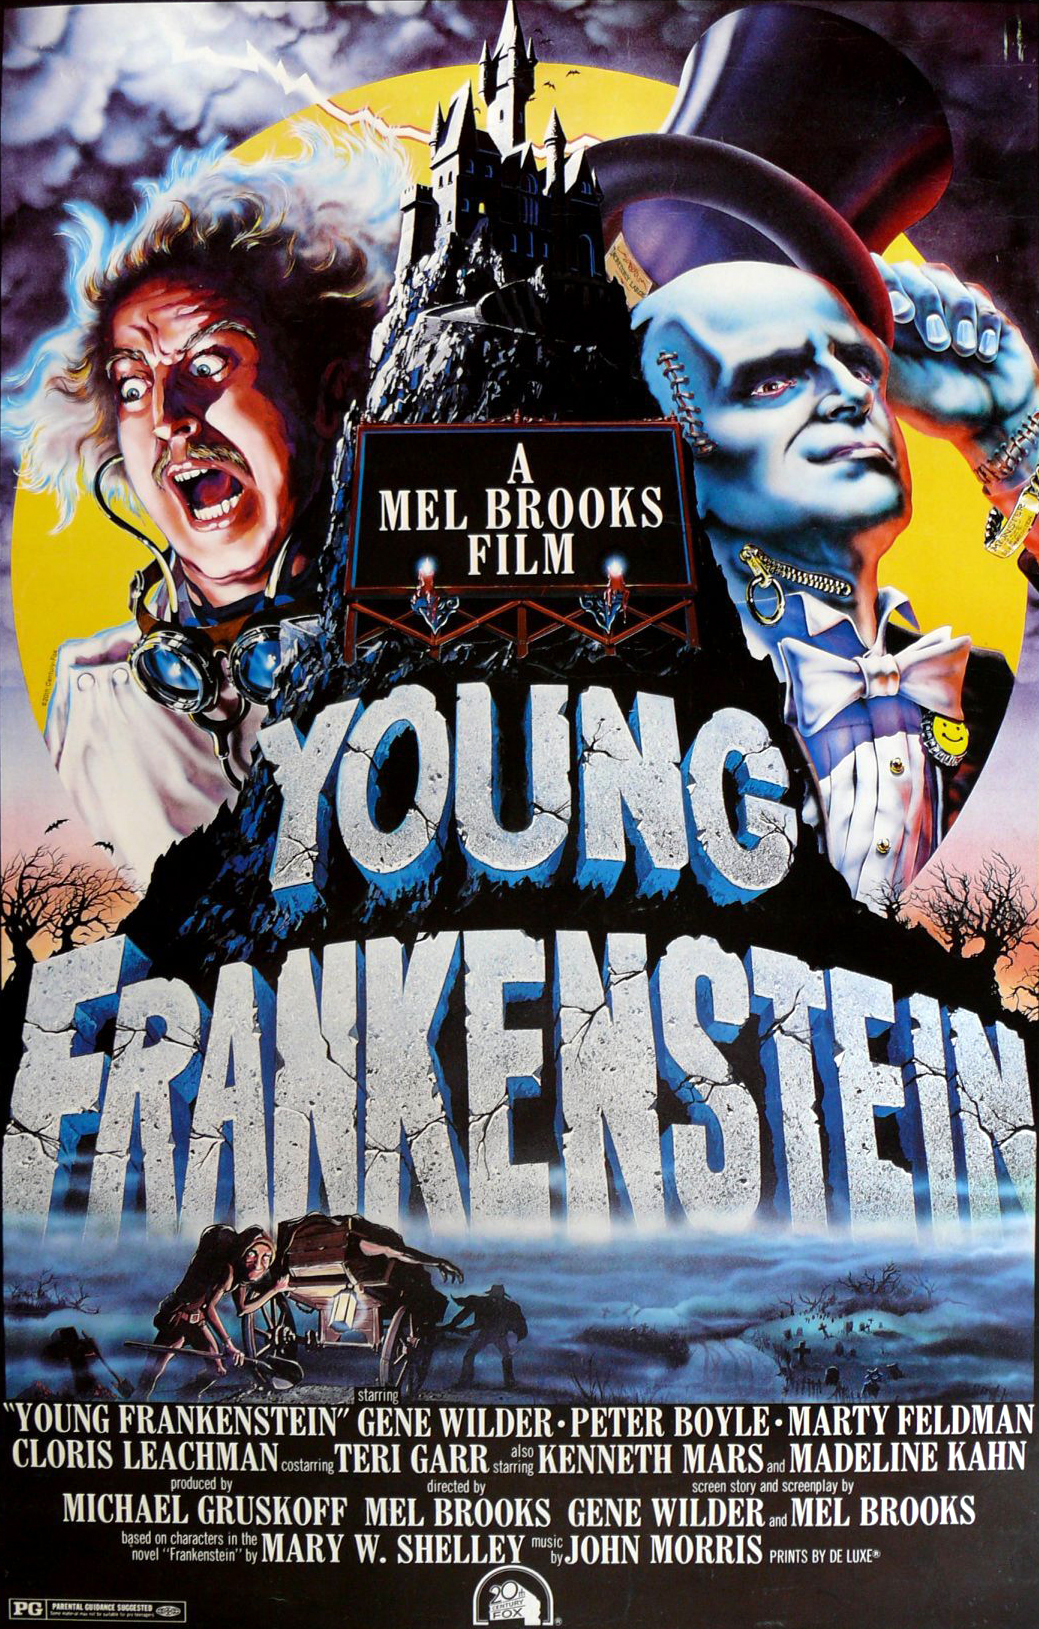 https://static.wikia.nocookie.net/horrormovies/images/e/ed/Young-frankenstein_poster-1-.jpg/revision/latest?cb=20150426161349